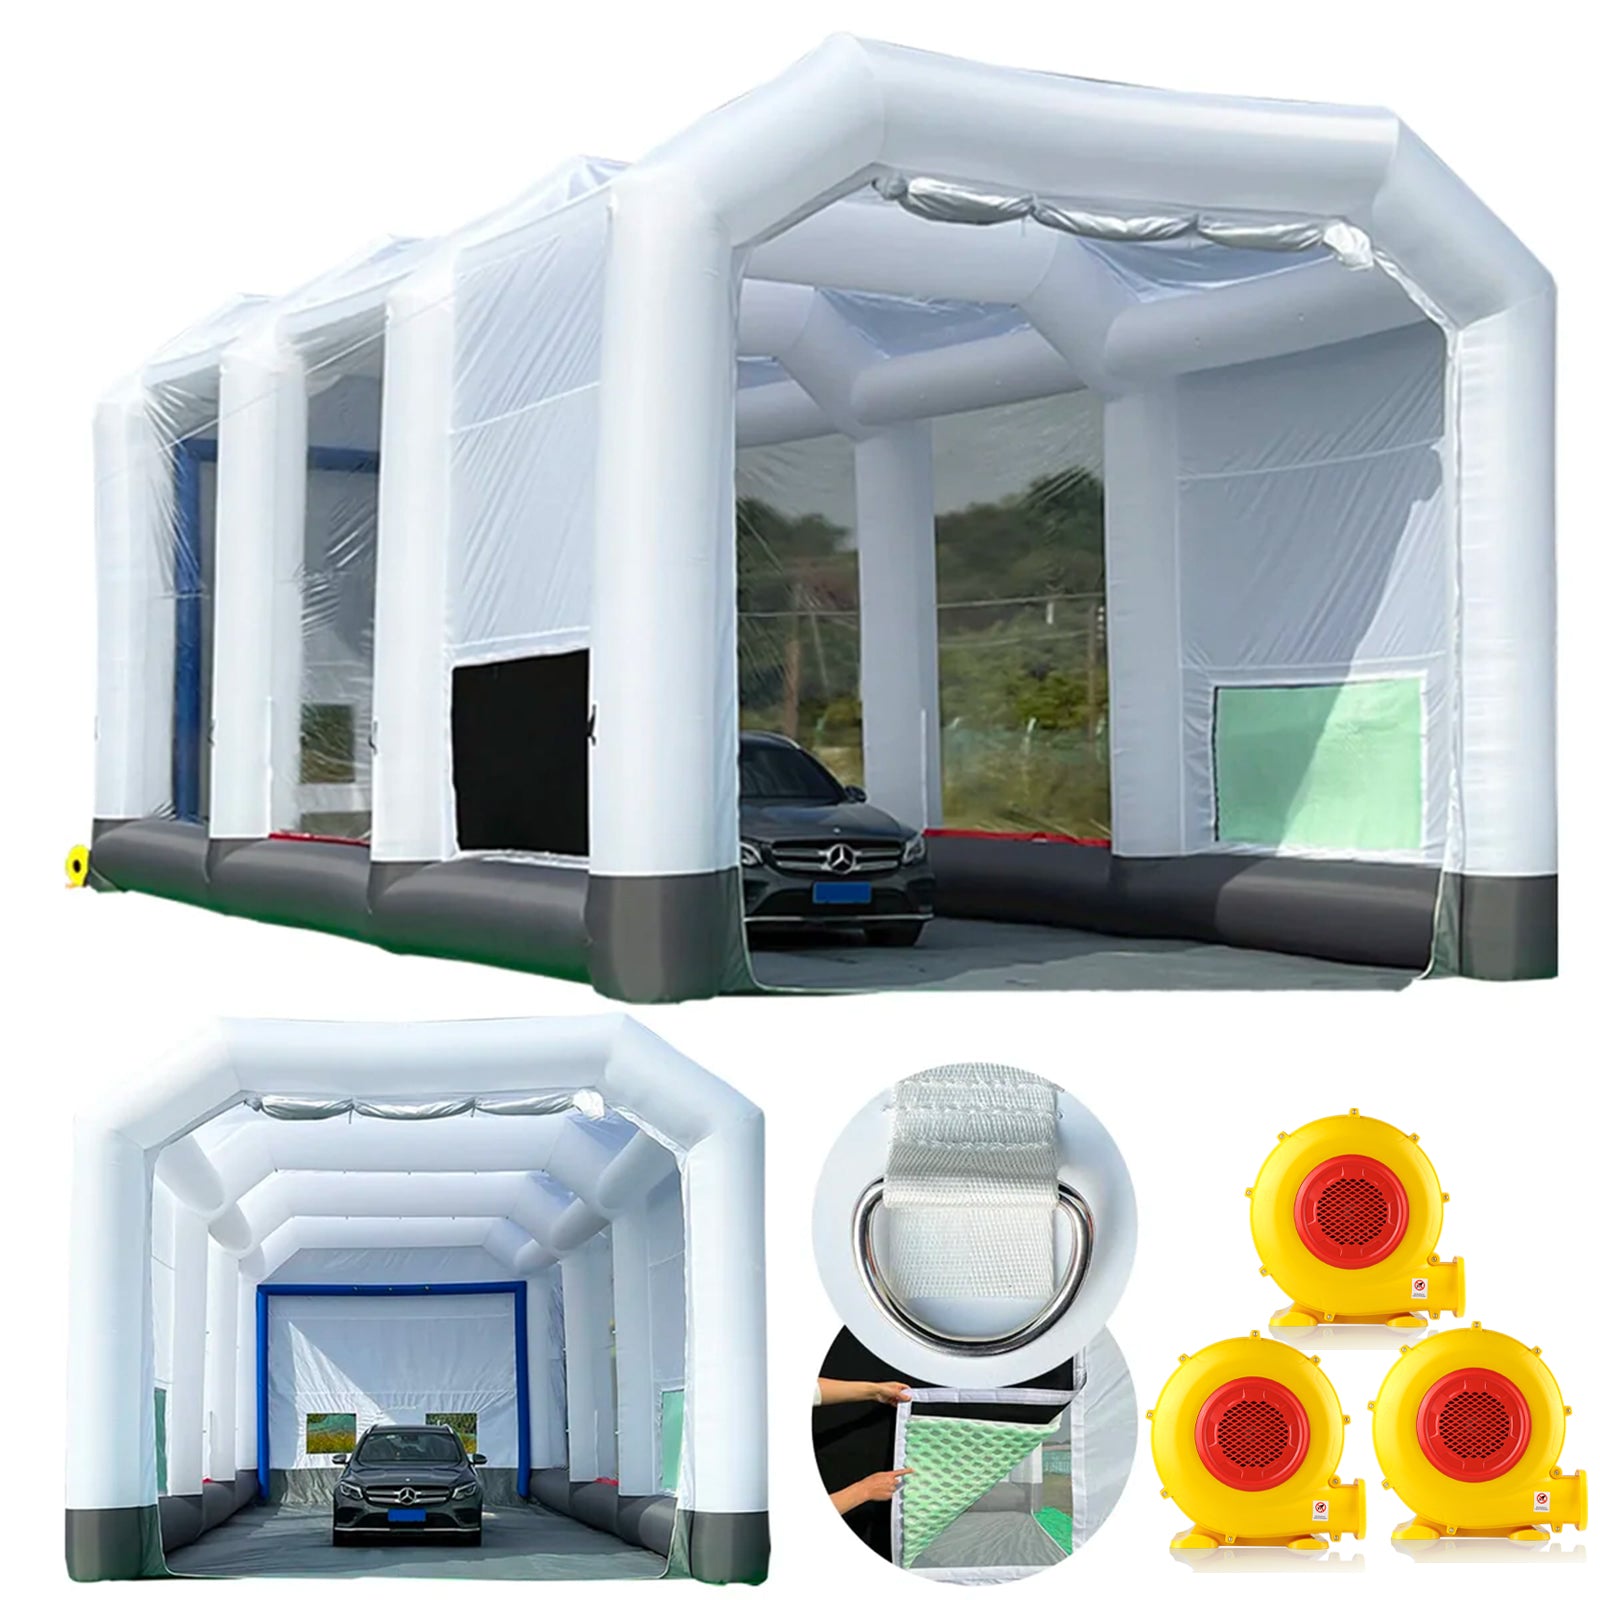 GORILLASPRO Inflatable Spray Paint Booth 42.5X21.5X18.6Ft with 3 Blowers (950W+750W+750W), Large Portable Auto Paint Booth for Trucks, Aircraft or Other Big Items Painting